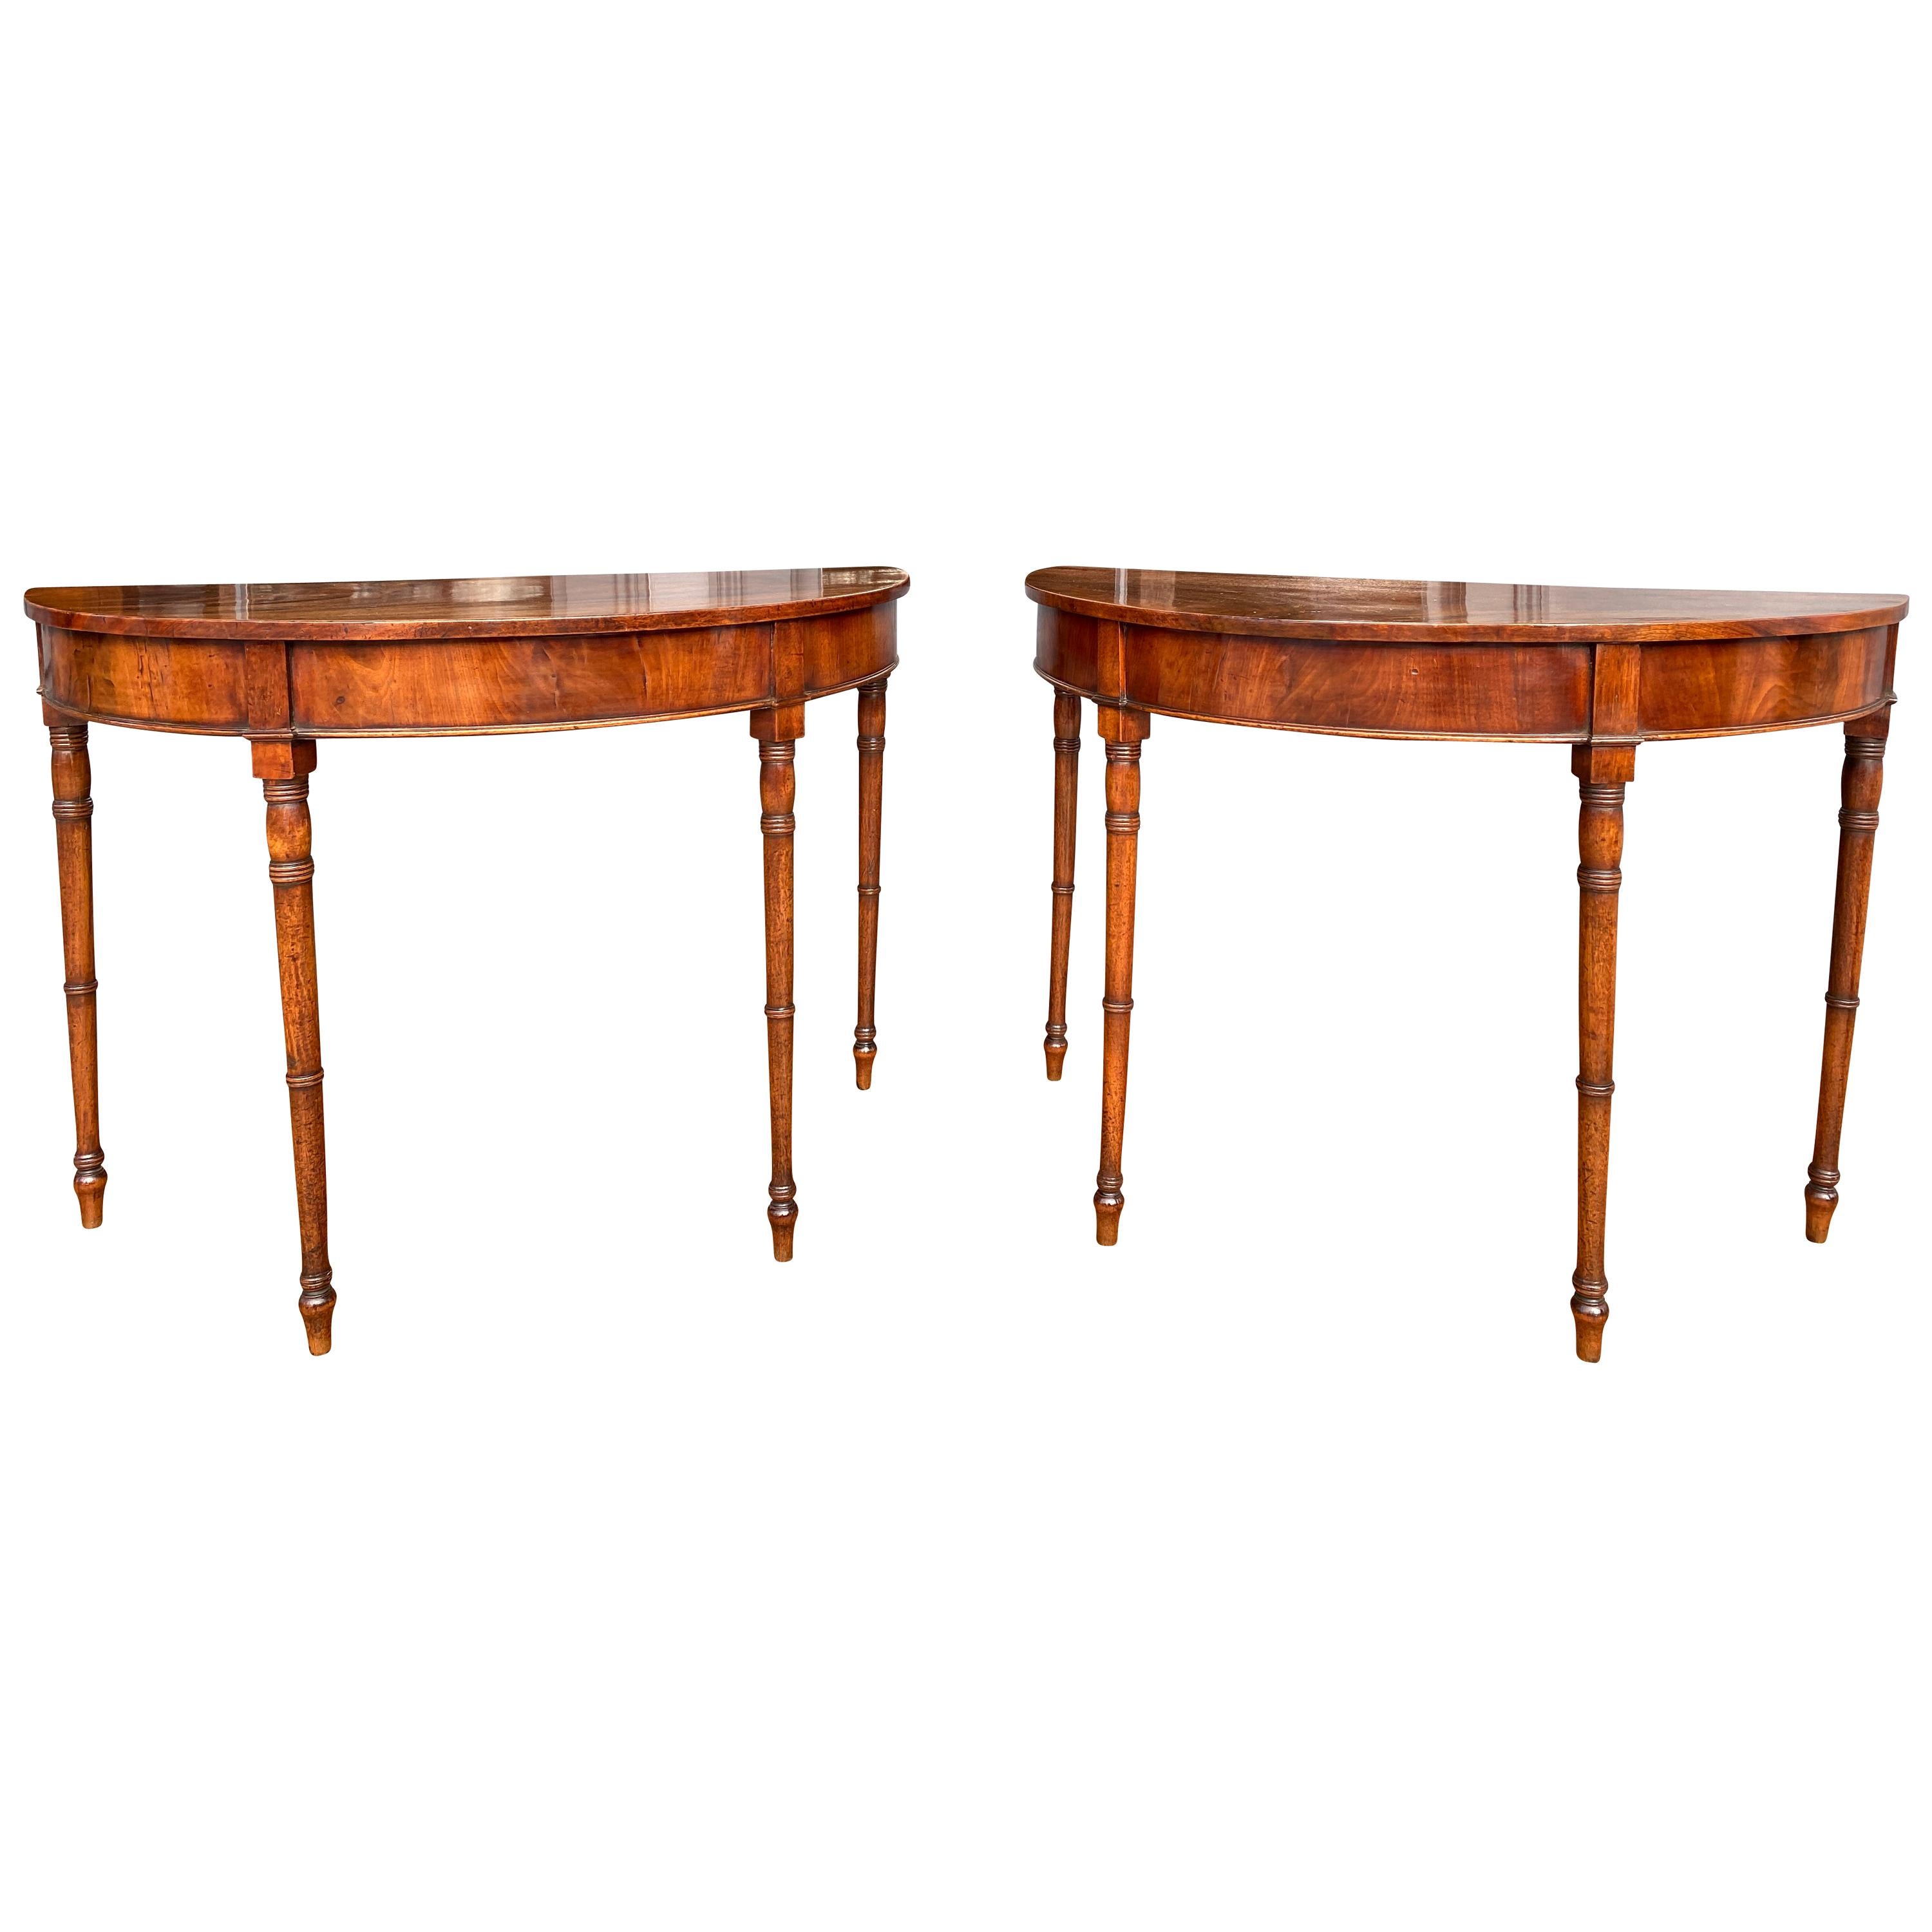 Pair of Regency Mahogany Demilune Console Tables